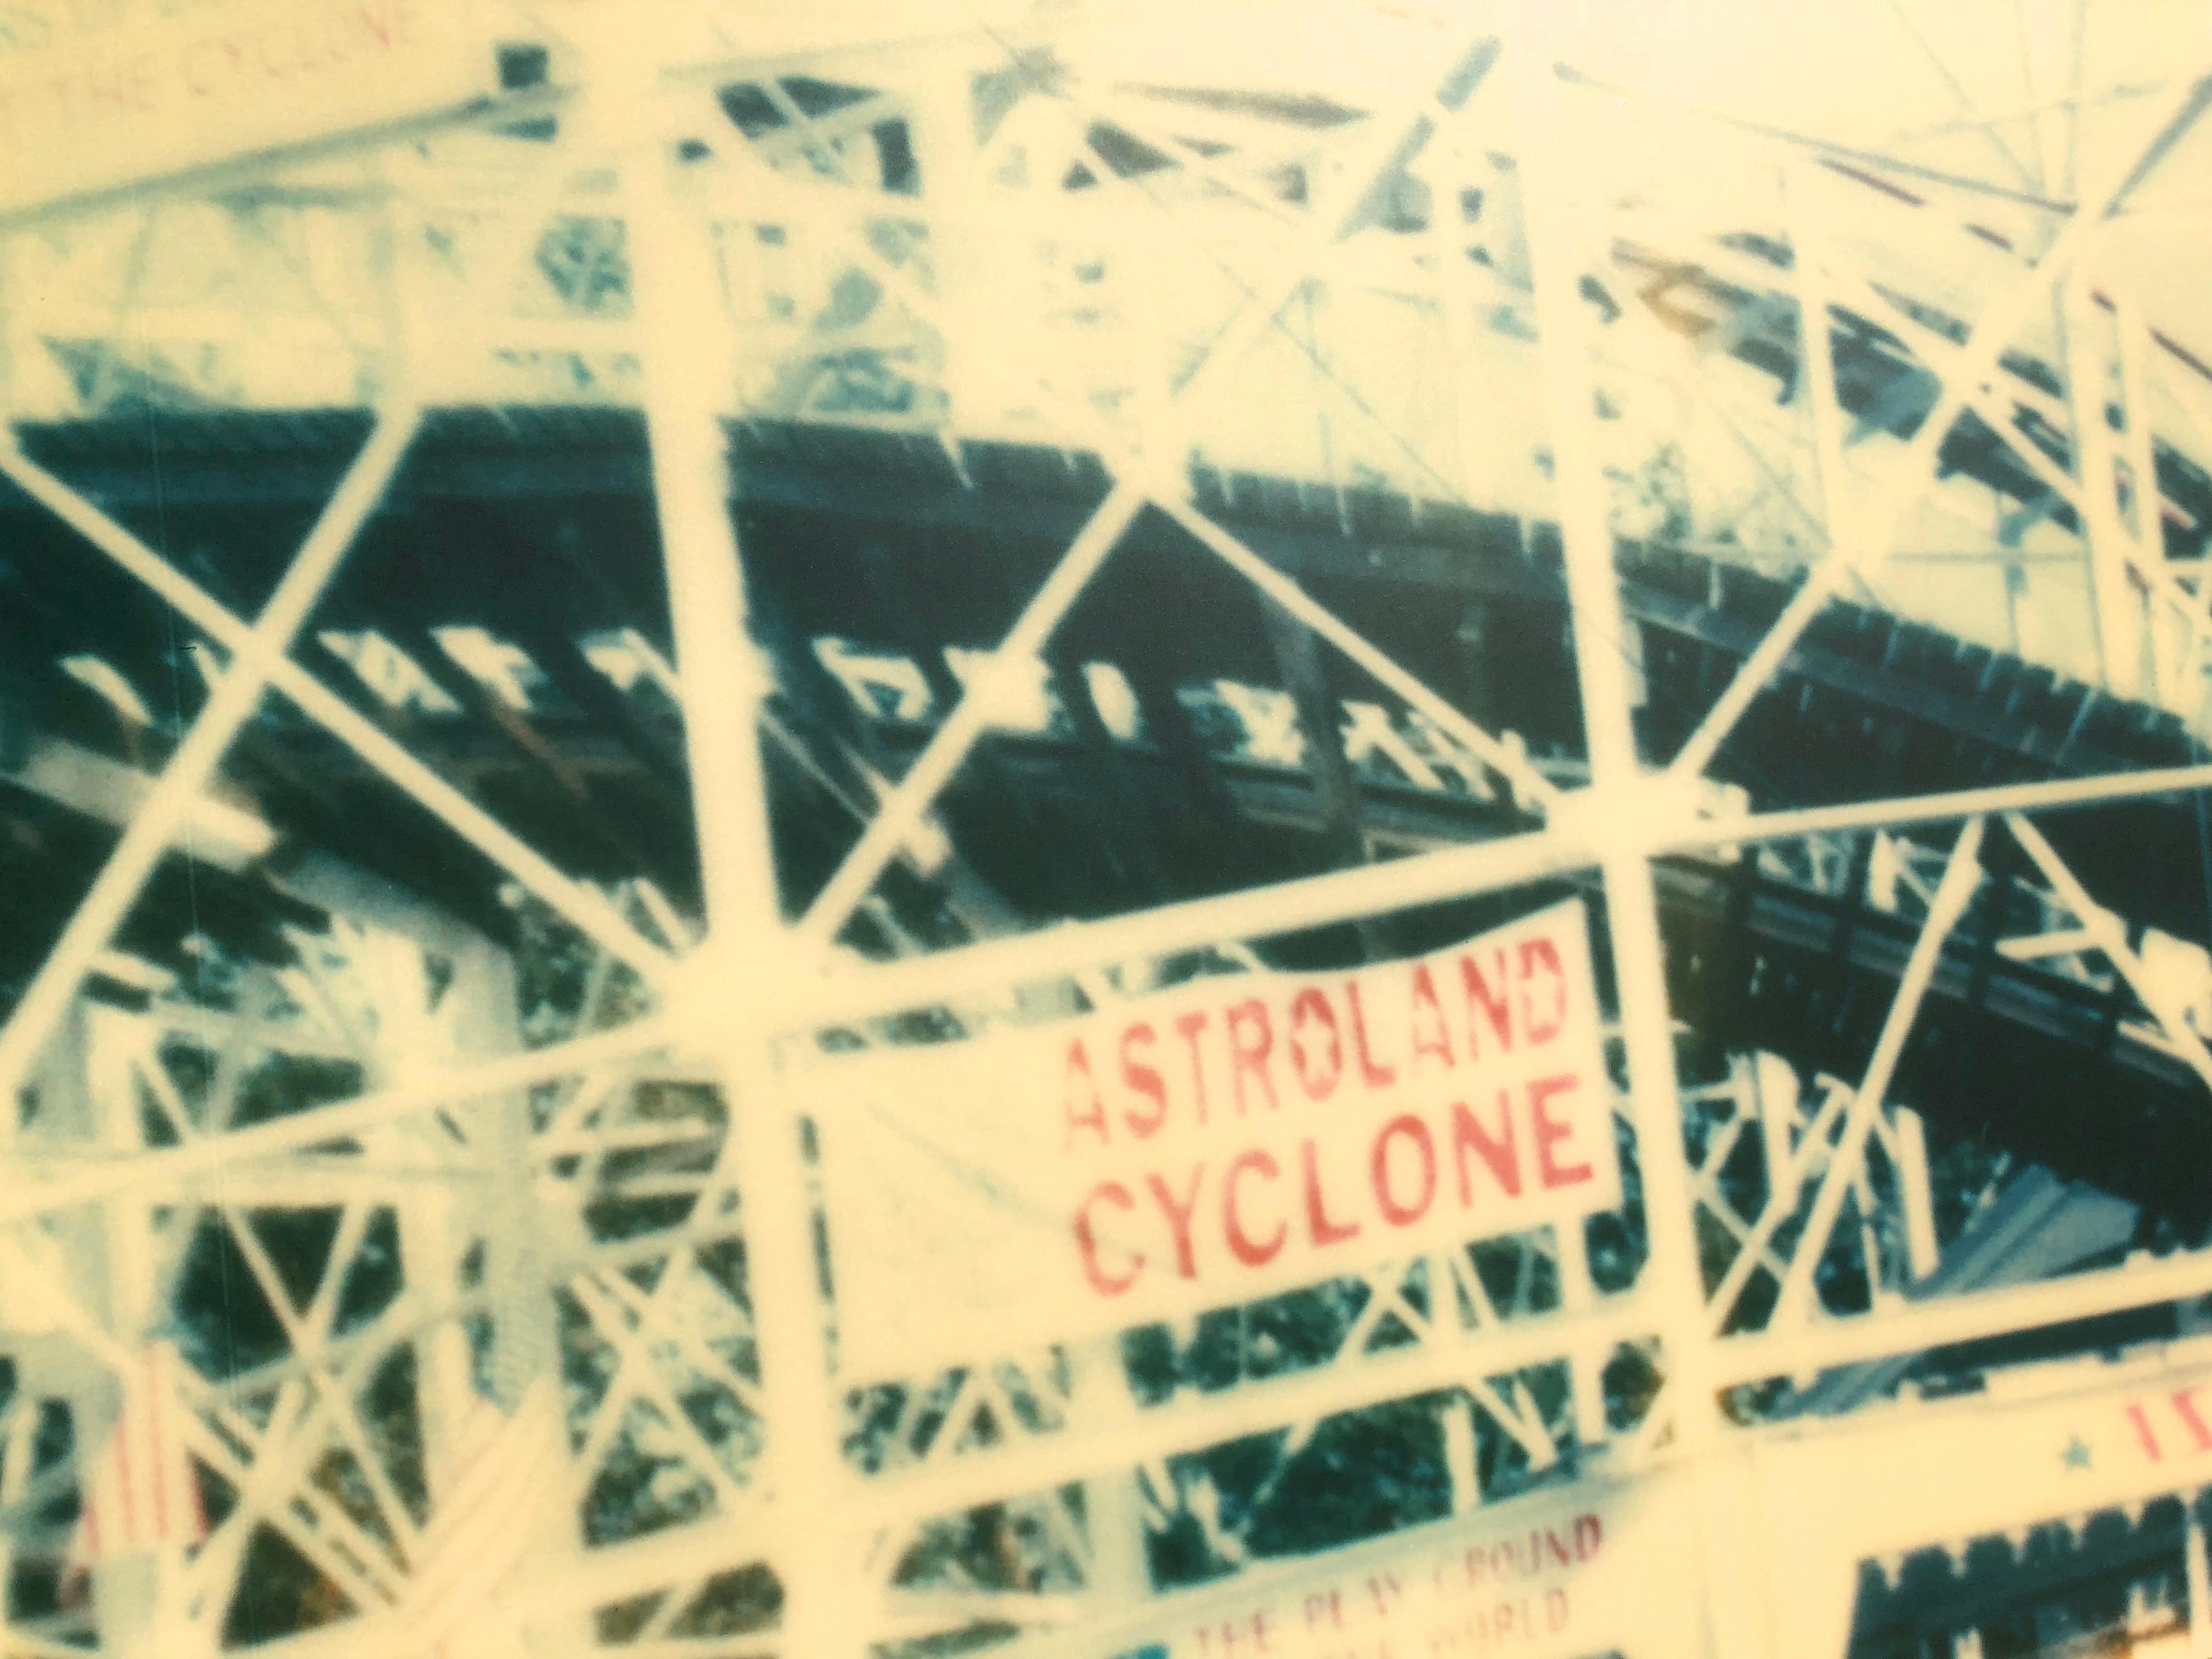 Cyclone (Stay) - Coney Island, 21 Century, Contemporary, Icons, Landscape - Beige Color Photograph by Stefanie Schneider